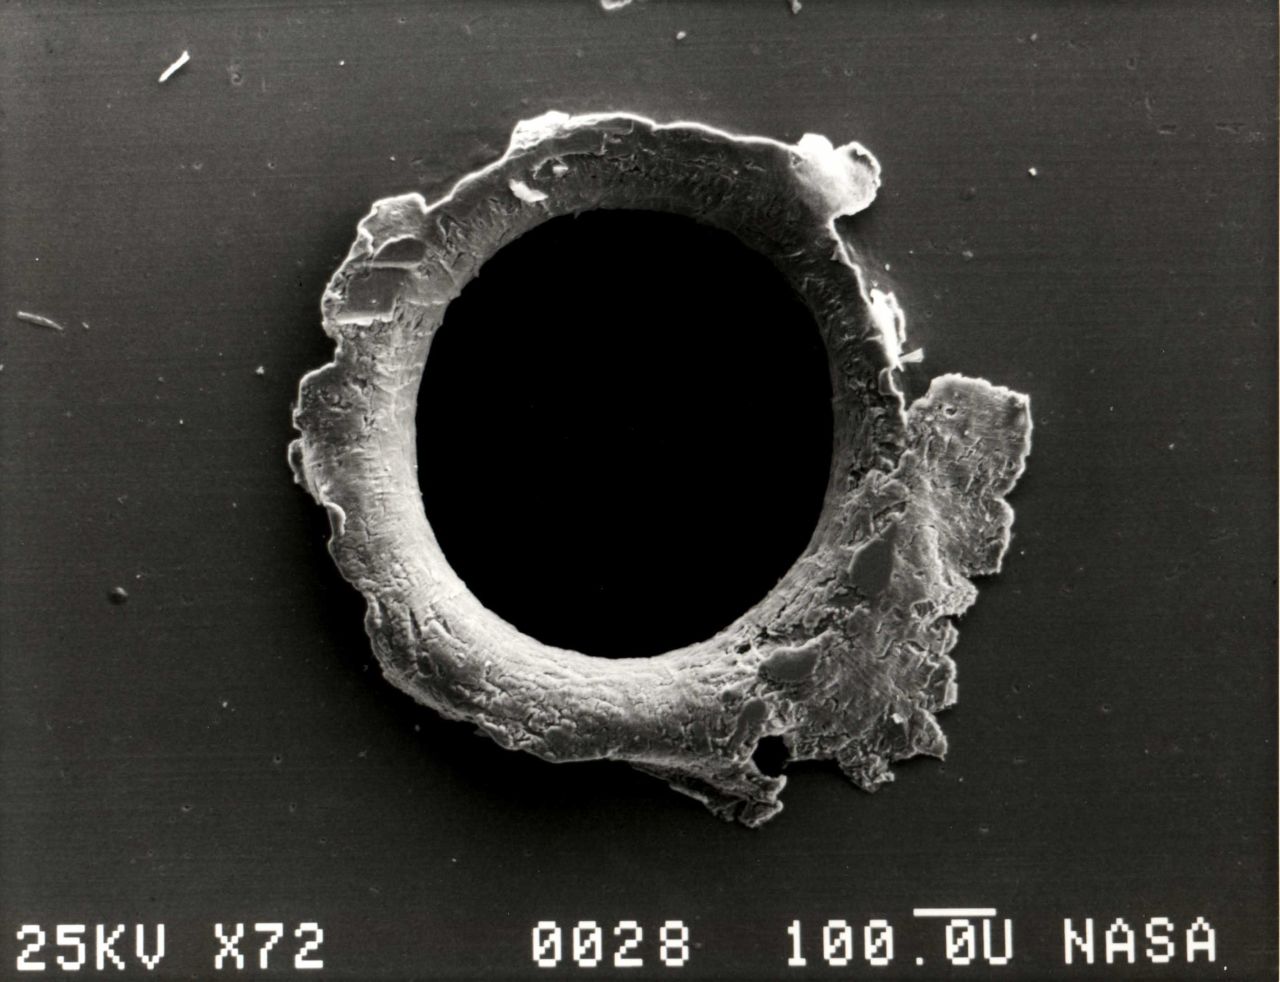 A close-up photograph showing the damage sustained by the Solar MAX experiment from a tiny piece of space debris. Today the International Space Station has a number of debris protocols, from maneuvering out of a collision path to sheltering in a Soyuz capsule when the probability of a significant collision is high.   